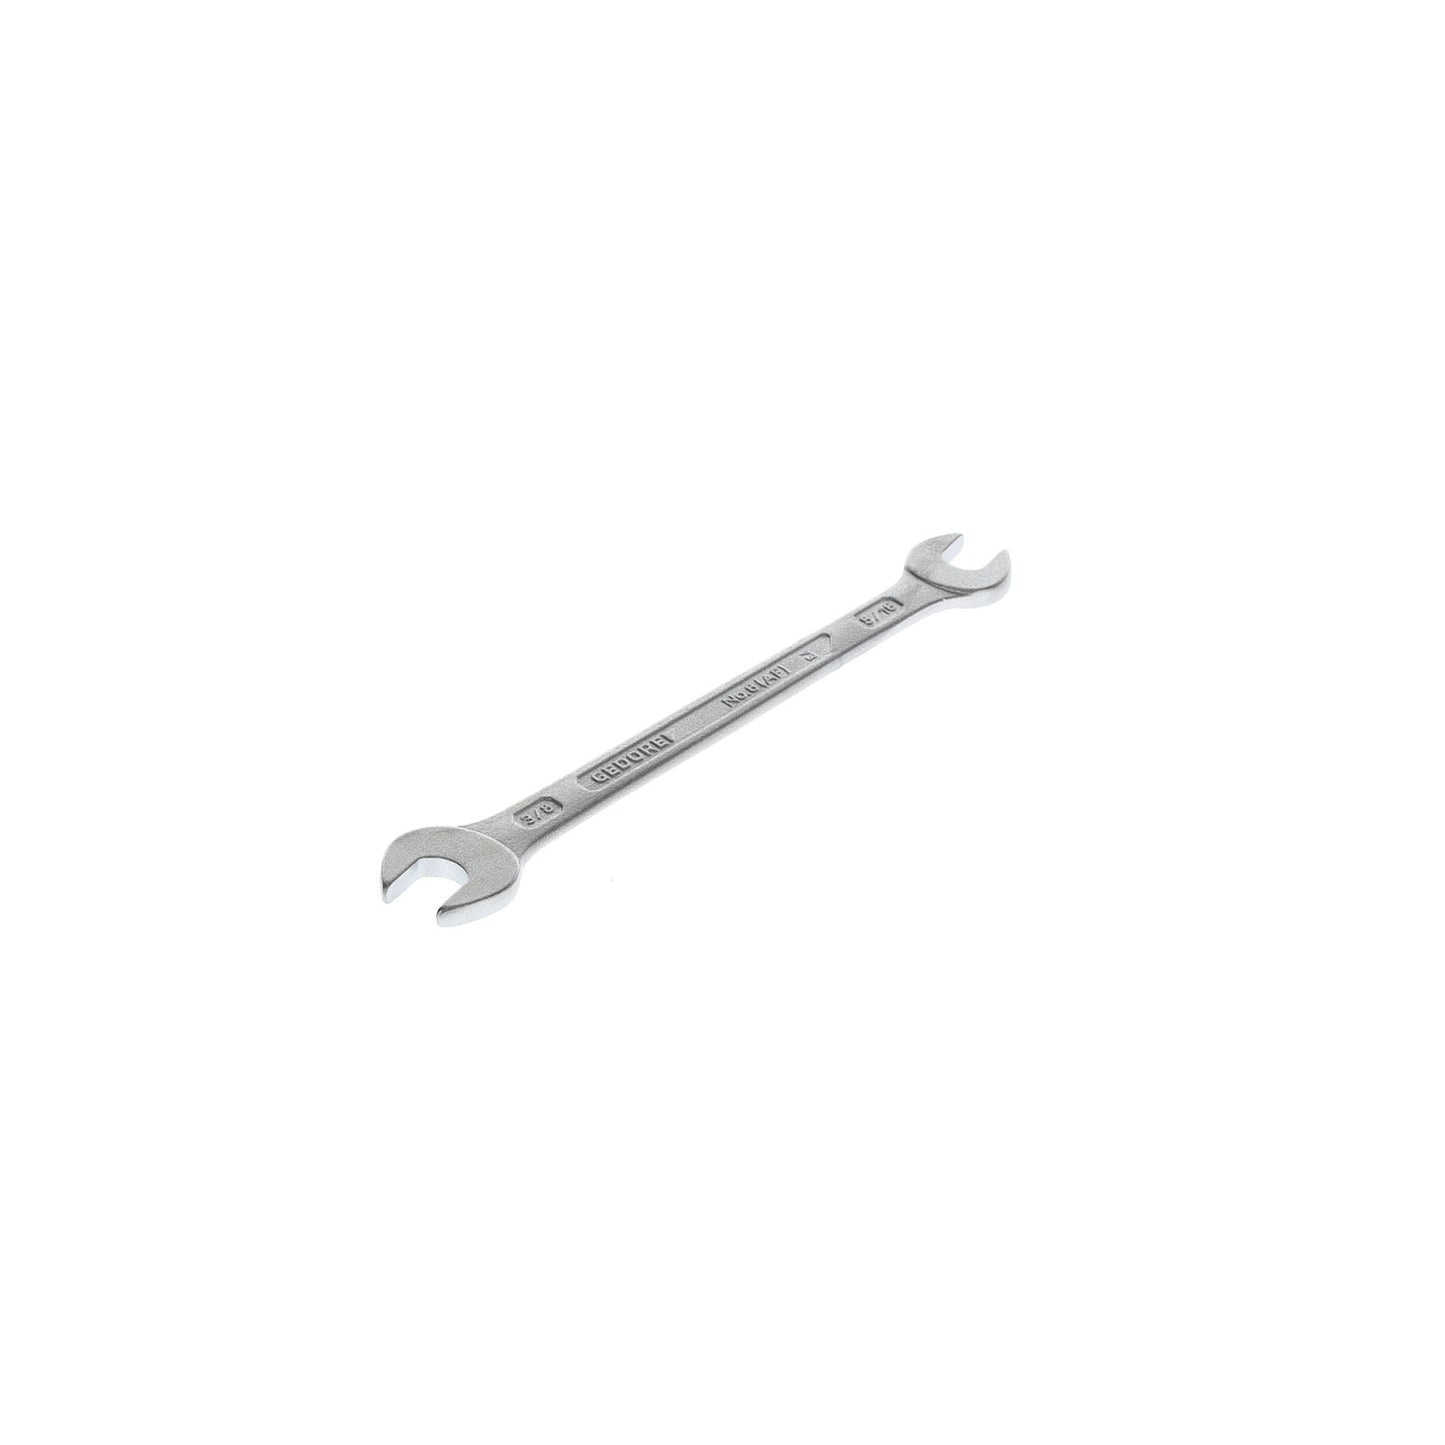 GEDORE 6 5/16X3/8AF - 2-Mount Fixed Wrench, 5/16x3/8AF (6070100)